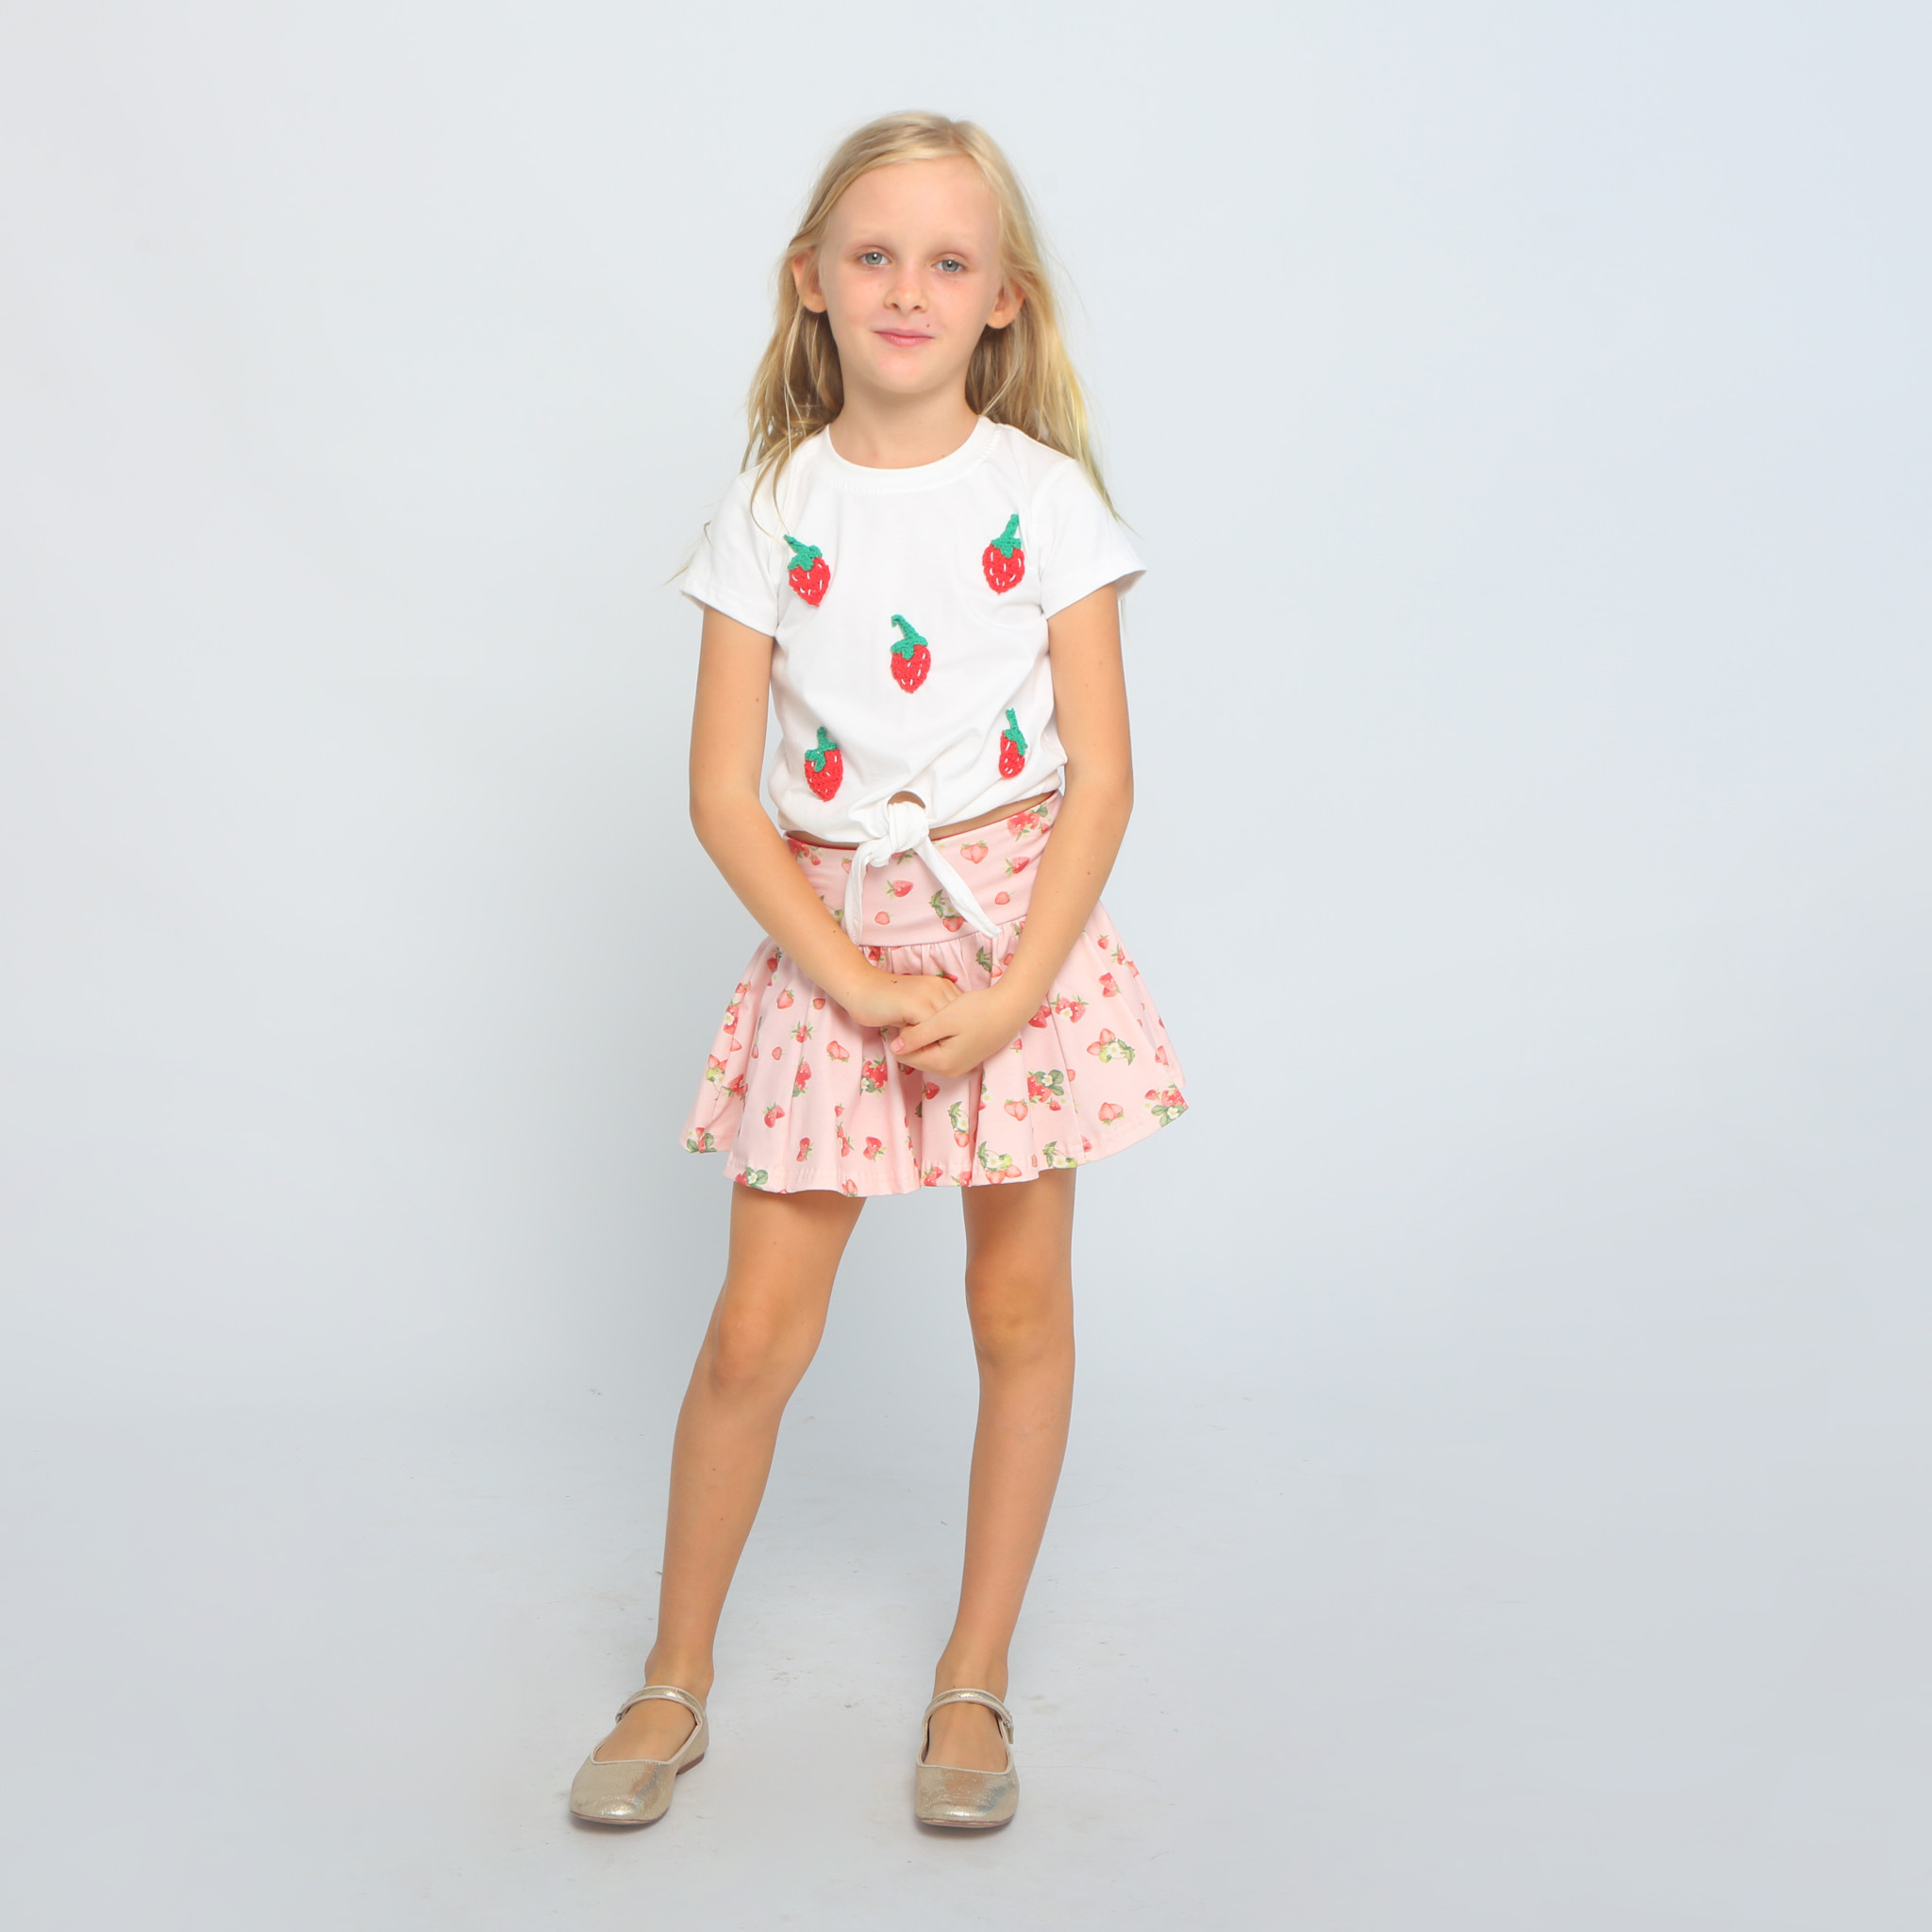 Joyous & Free Girl Front Tie Top with Crotchet Strawberries